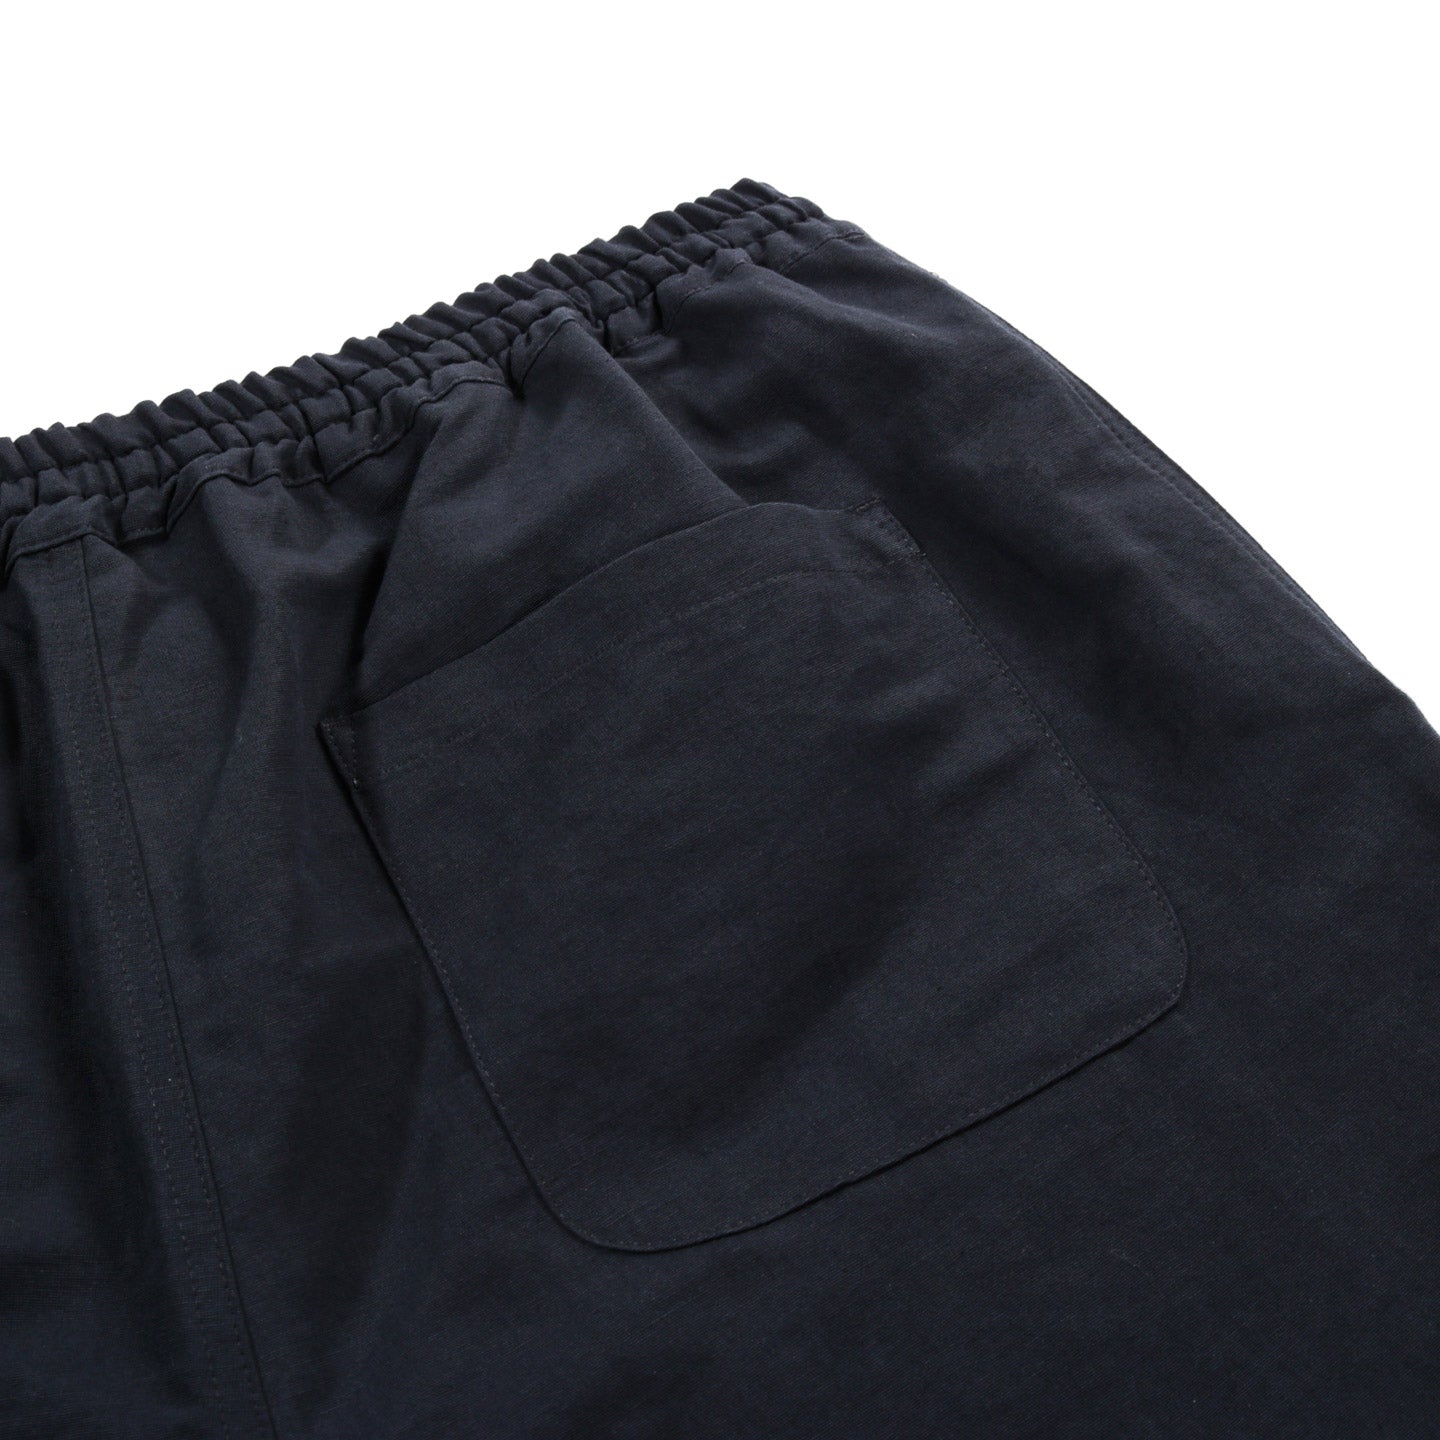 A KIND OF GUISE VOLTA SHORTS BLU NAVY